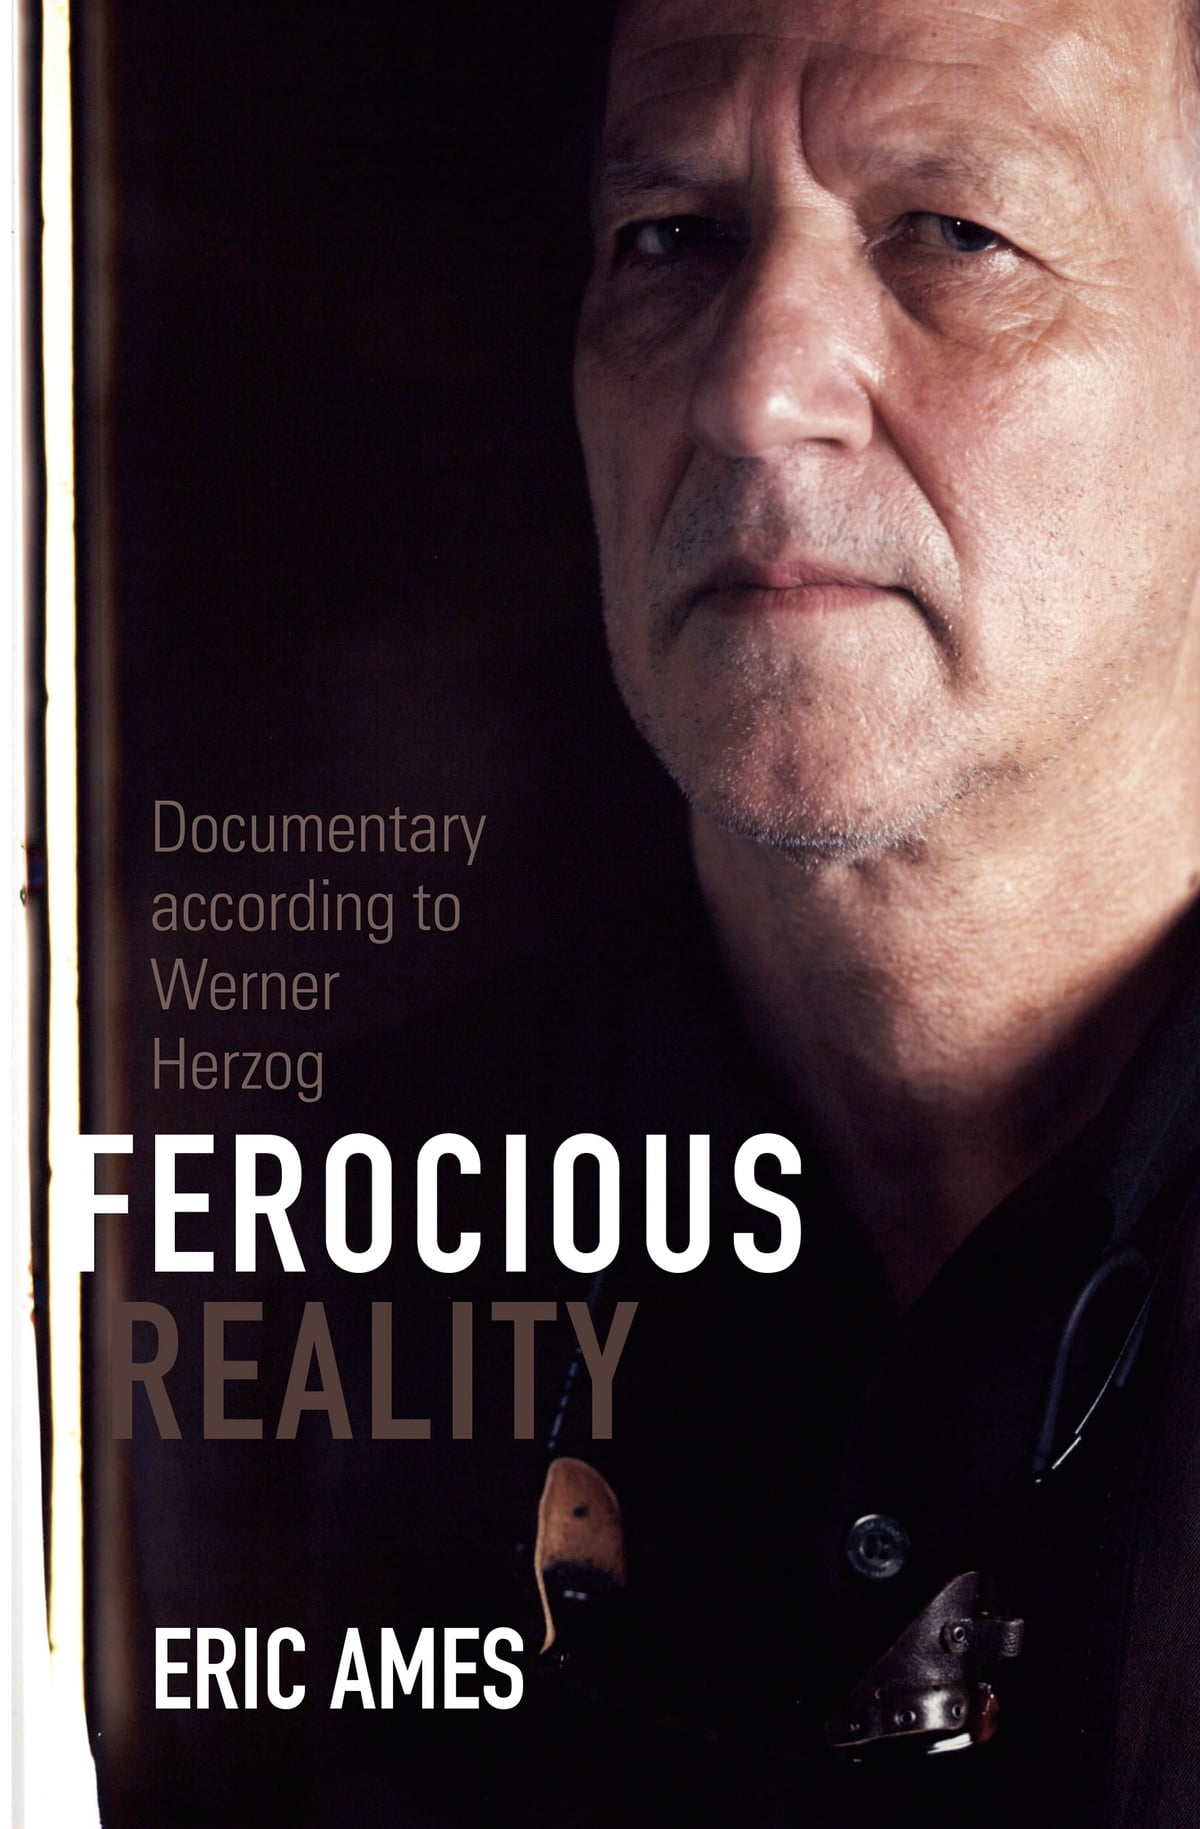 Eric (Author), Ames Ferocious Reality: Documentary According to Werner Herzog ( Visible Evidence (Hardcover) #27 ) 